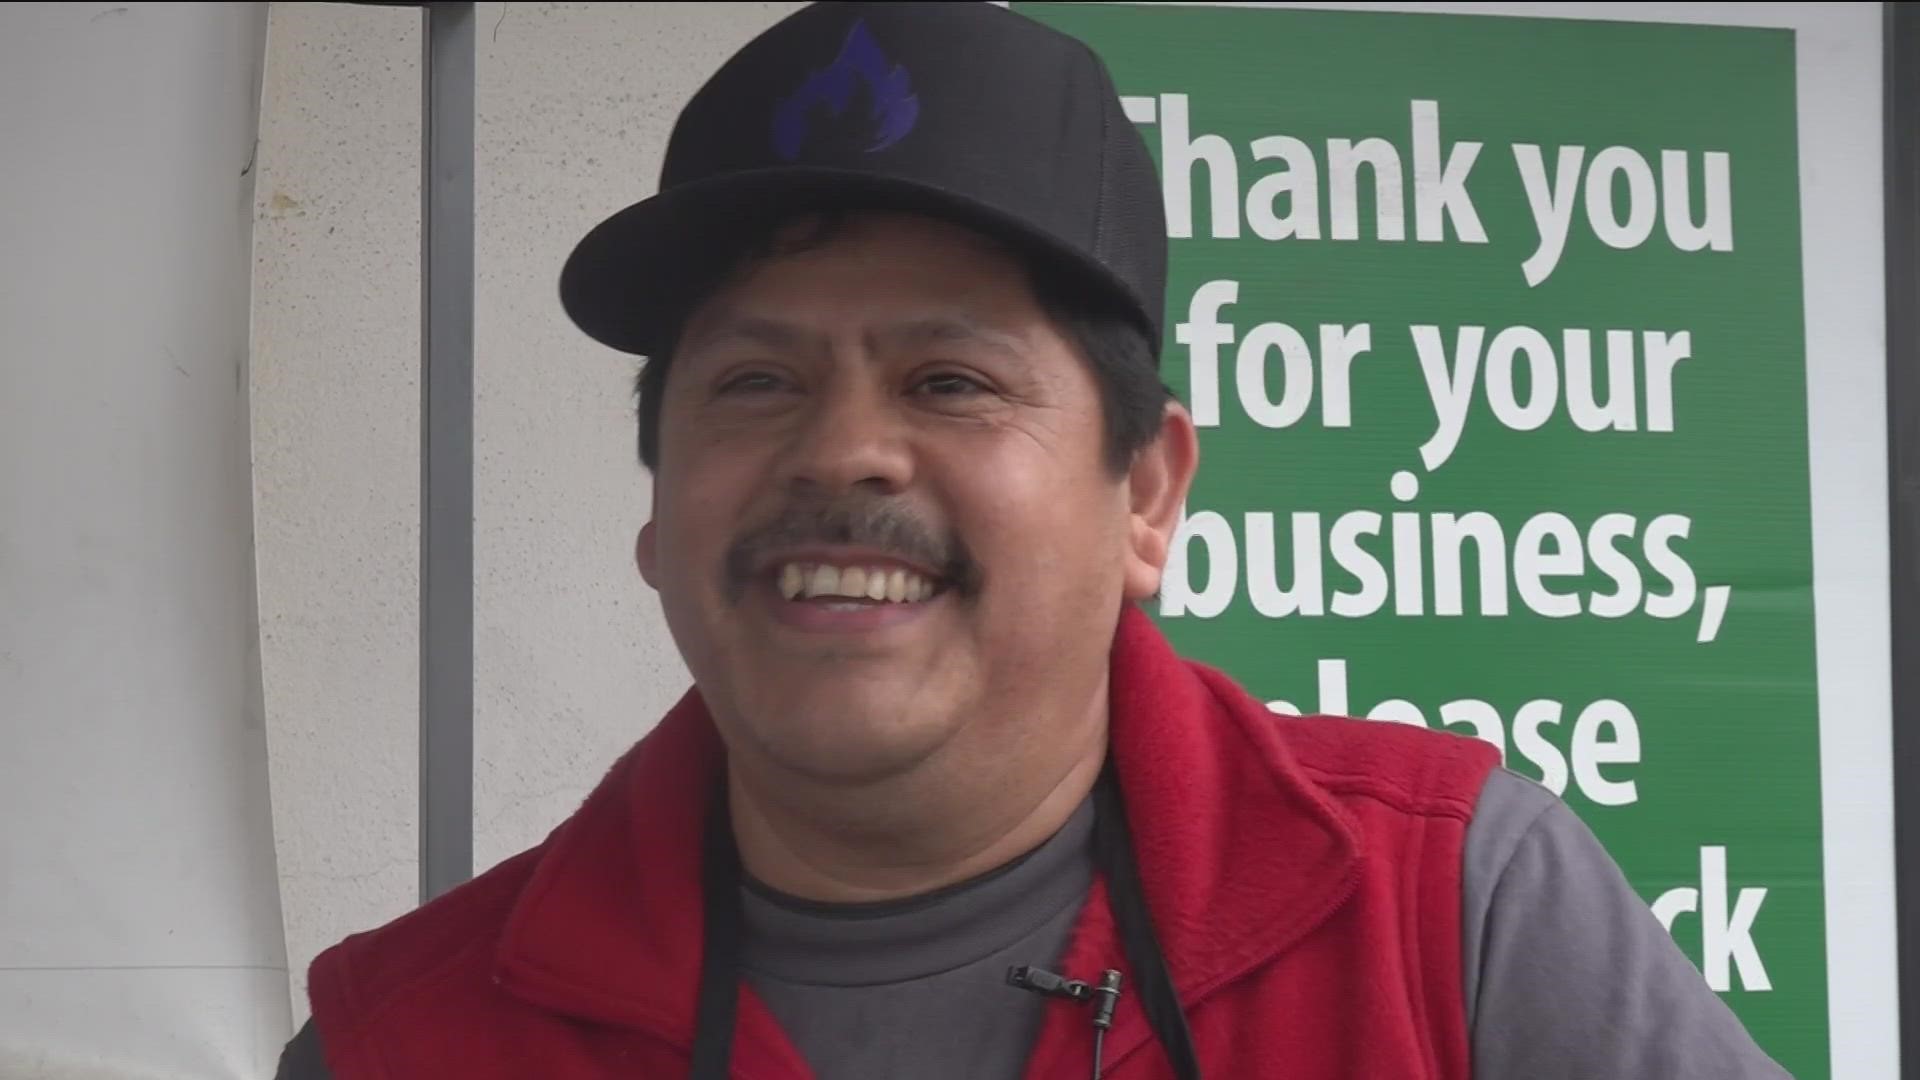 Local TikTok star "Juixxe" surprised a taco man with a generous tip. Dozens of customers have been supporting his taco stand from a now-viral post.